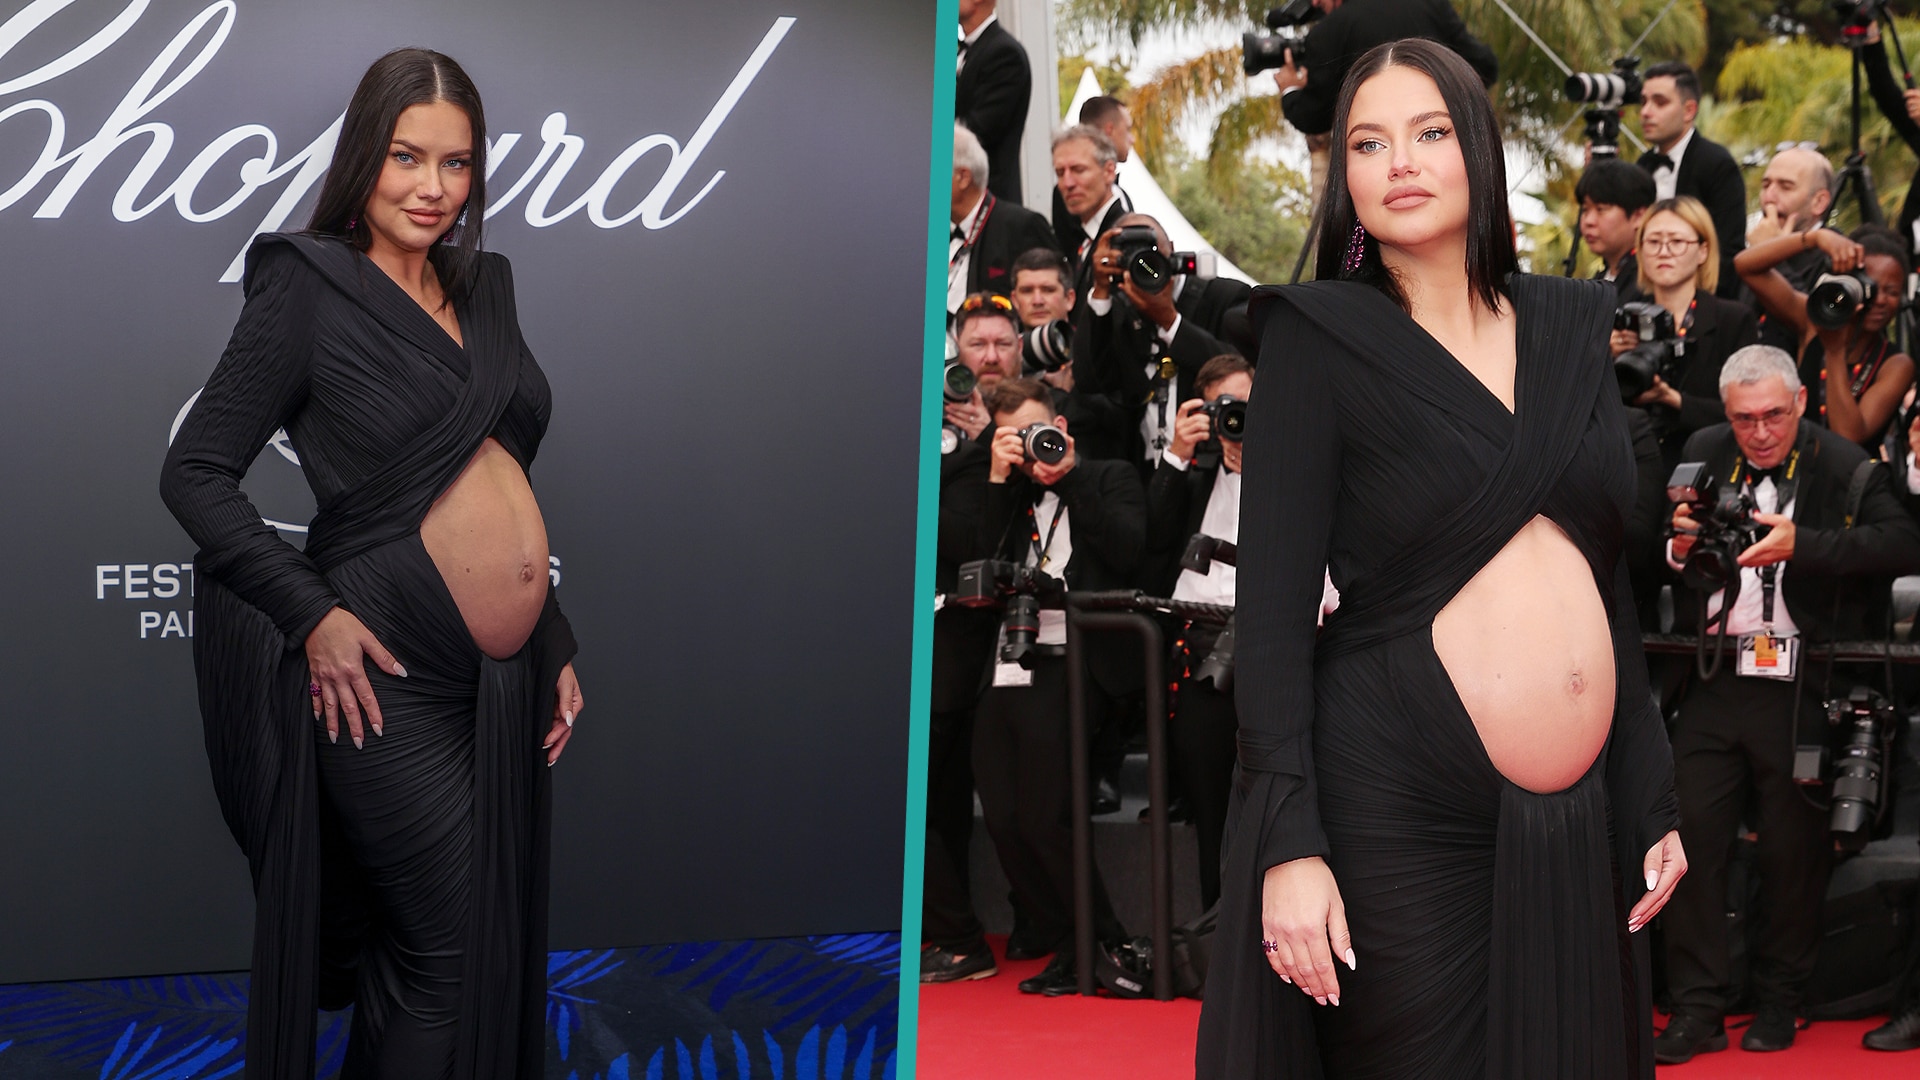 Watch Access Hollywood Highlight: Pregnant Adriana Lima Shows Off Her Bare  Baby Bump At 2022 Cannes Film Festival With Boyfriend - NBC.com